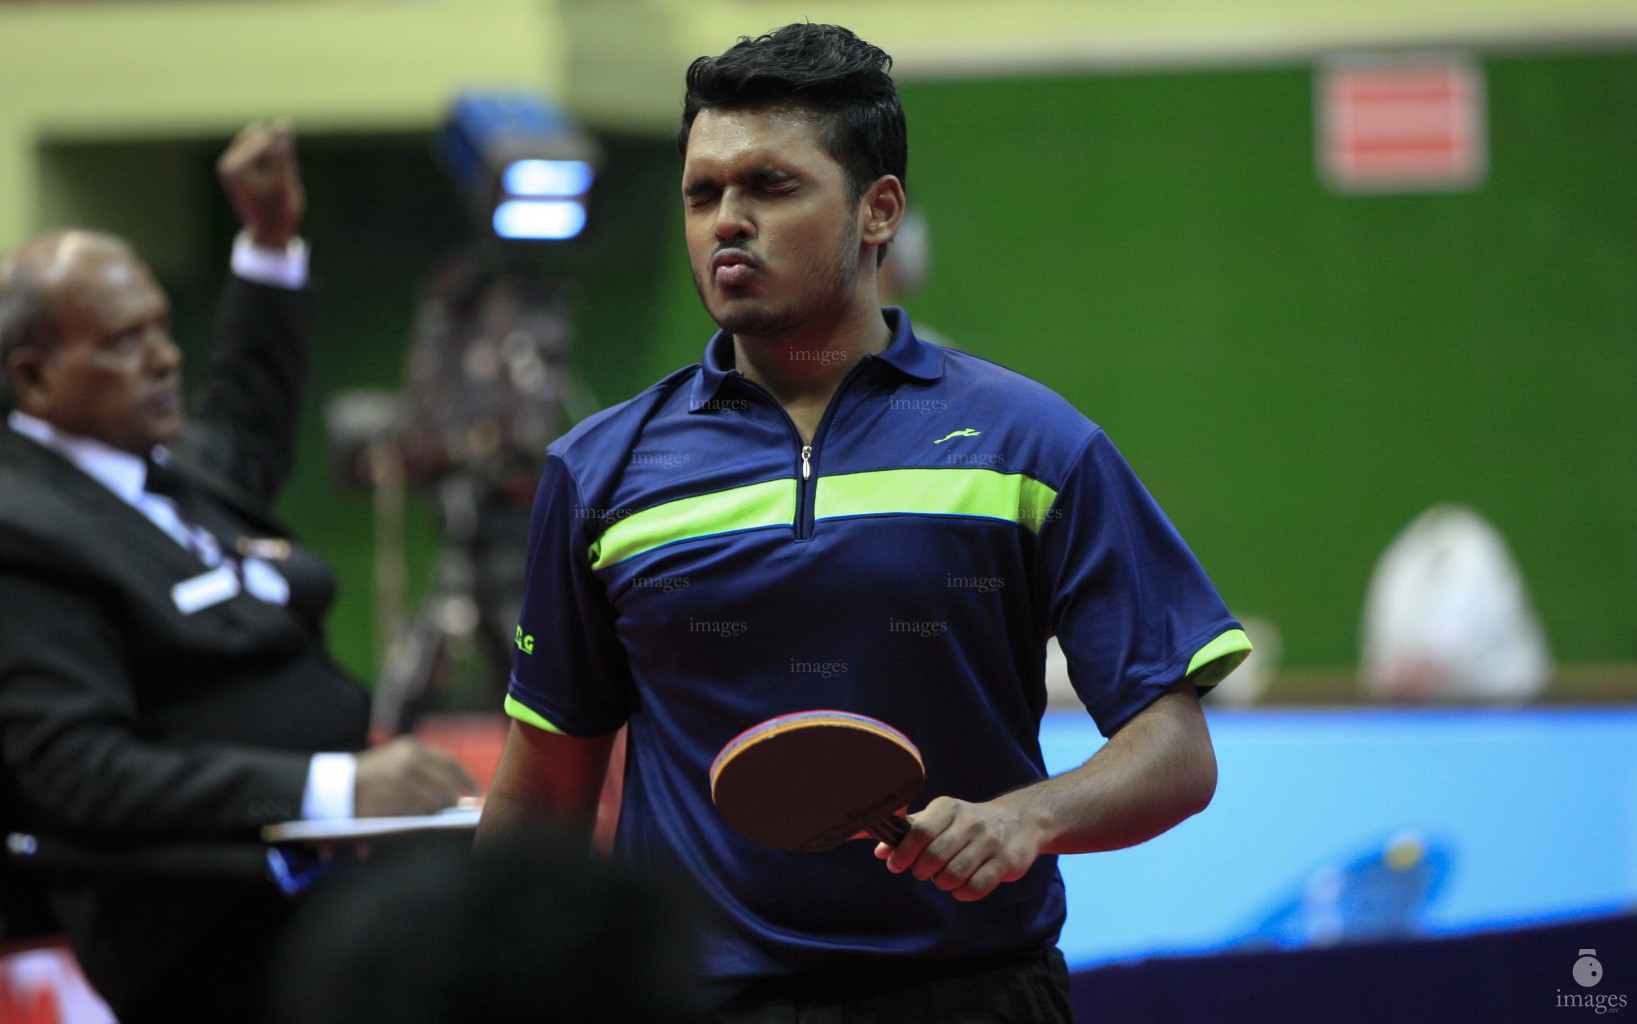 Day 2 of Maldives Table Tennis team events in the South Asian Games in Shillong, India (Images.mv Photo: Mohamed Ahsan)